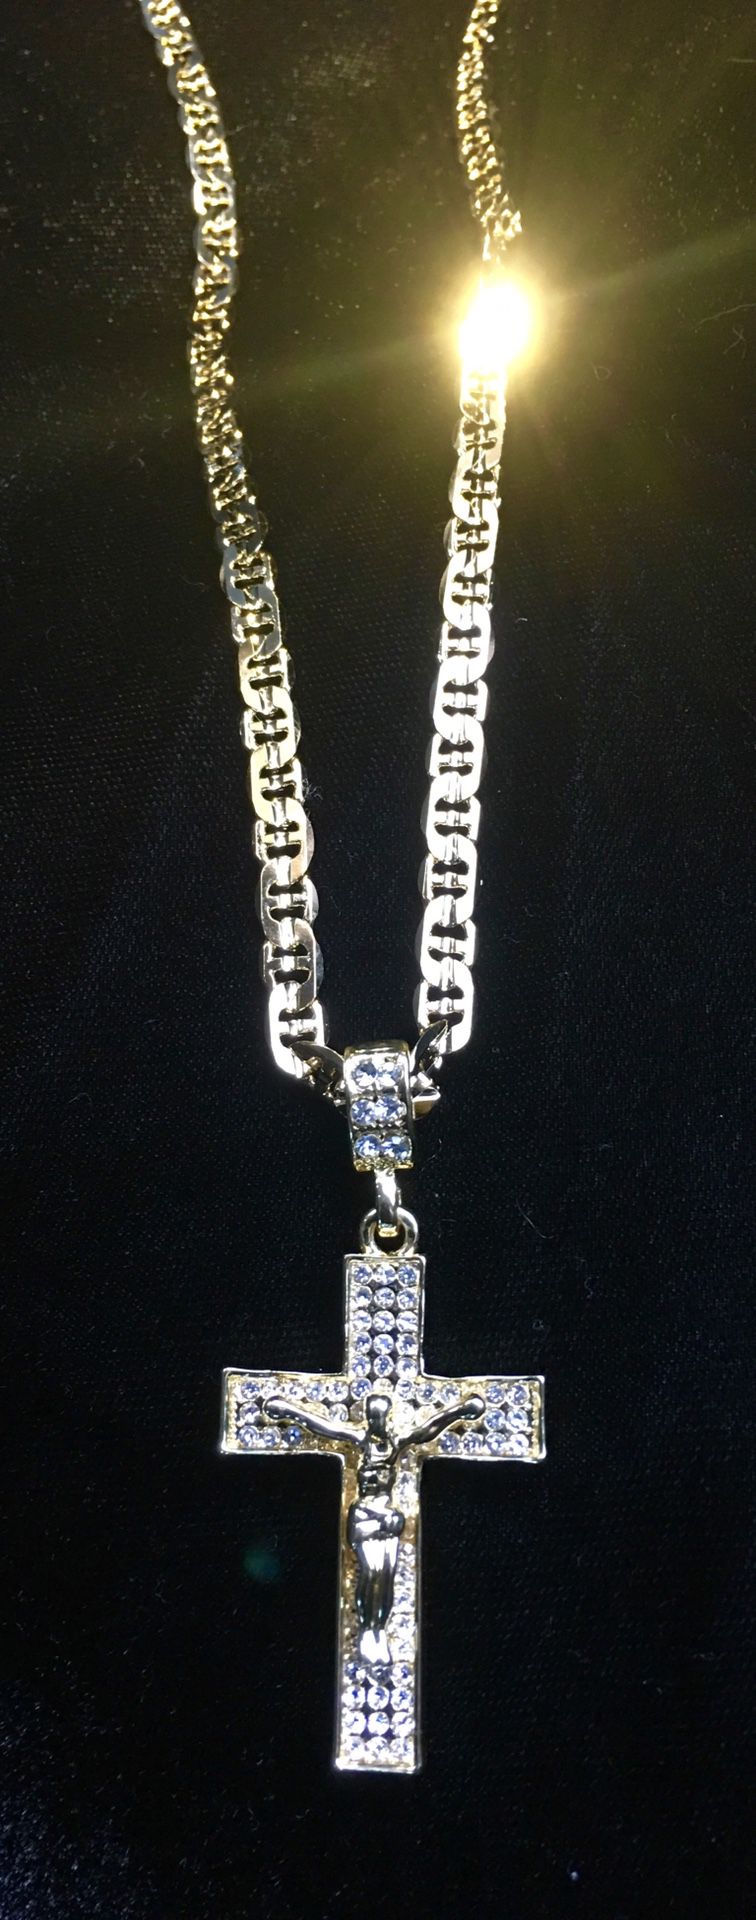 EXCLUSIVE CROSS 14K GOLD FULL DIAMONDS CZ NEW CHAIN MADE IN ITALY!